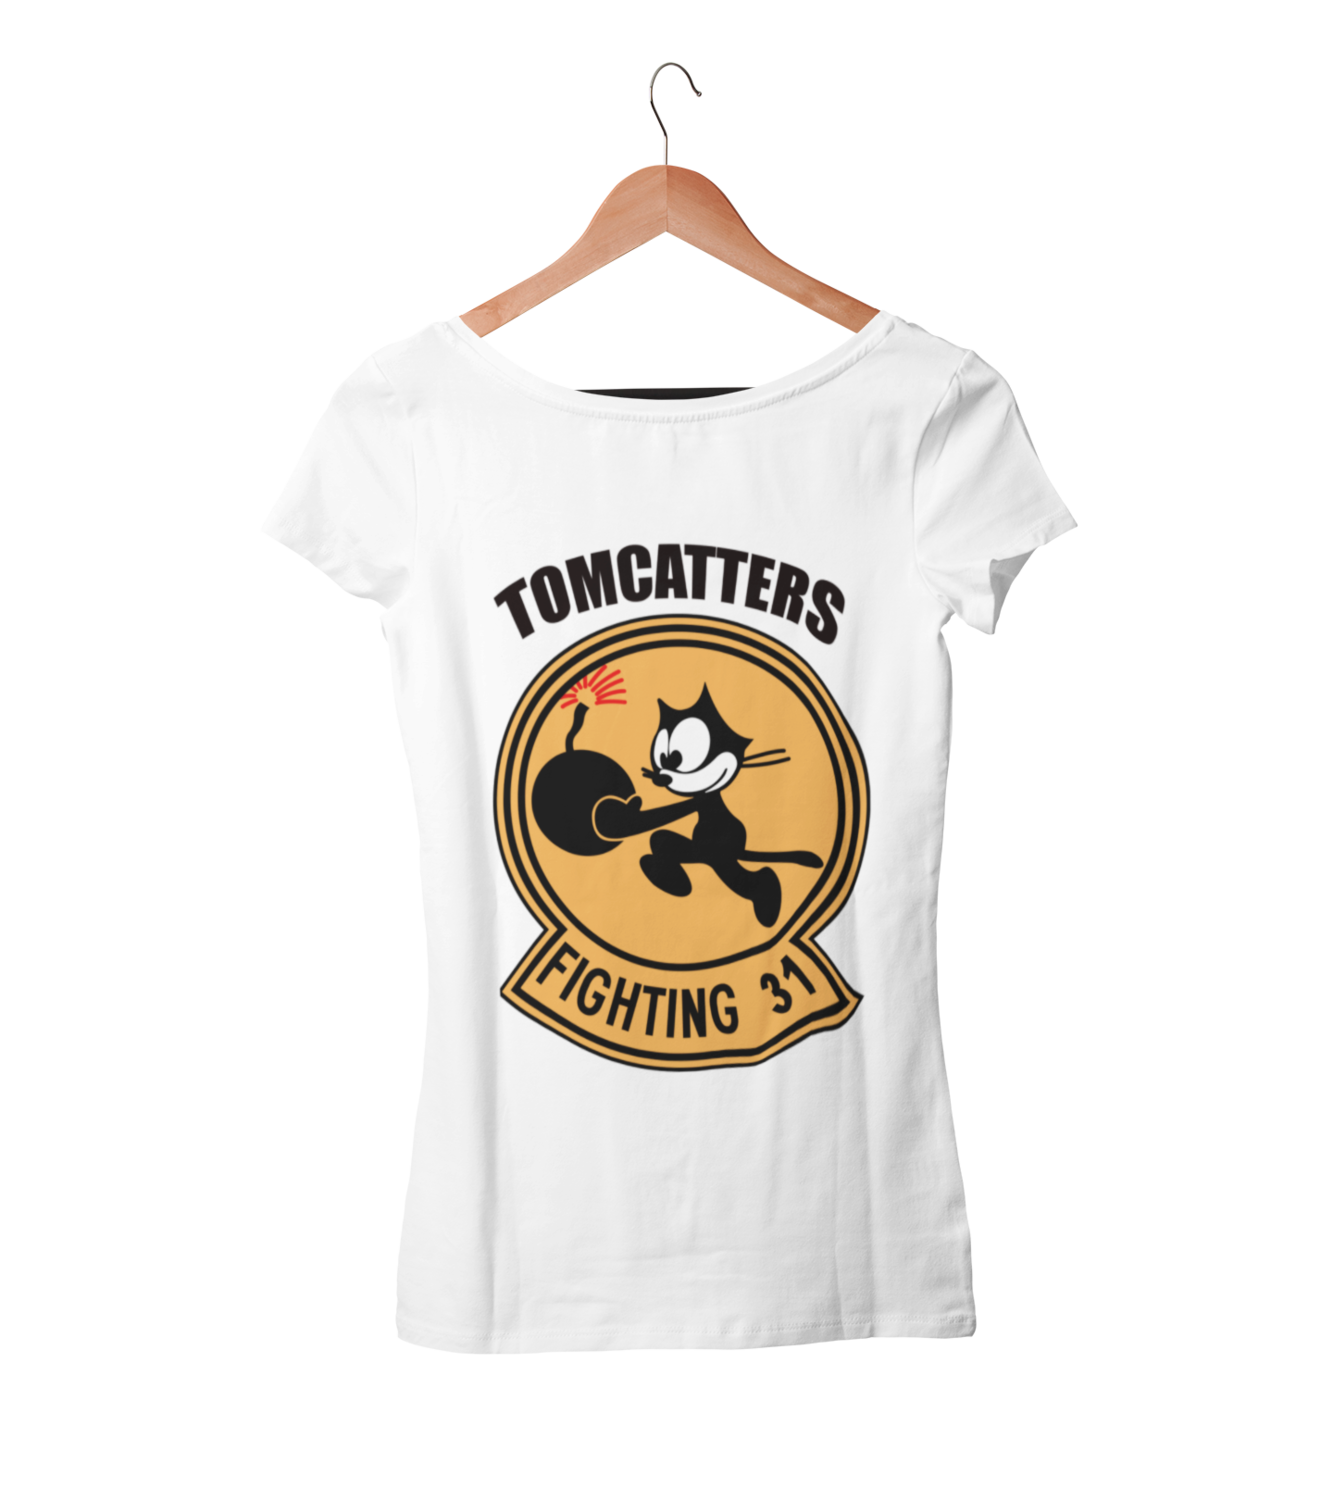 TOMCATTERS T-SHIRT WOMAN